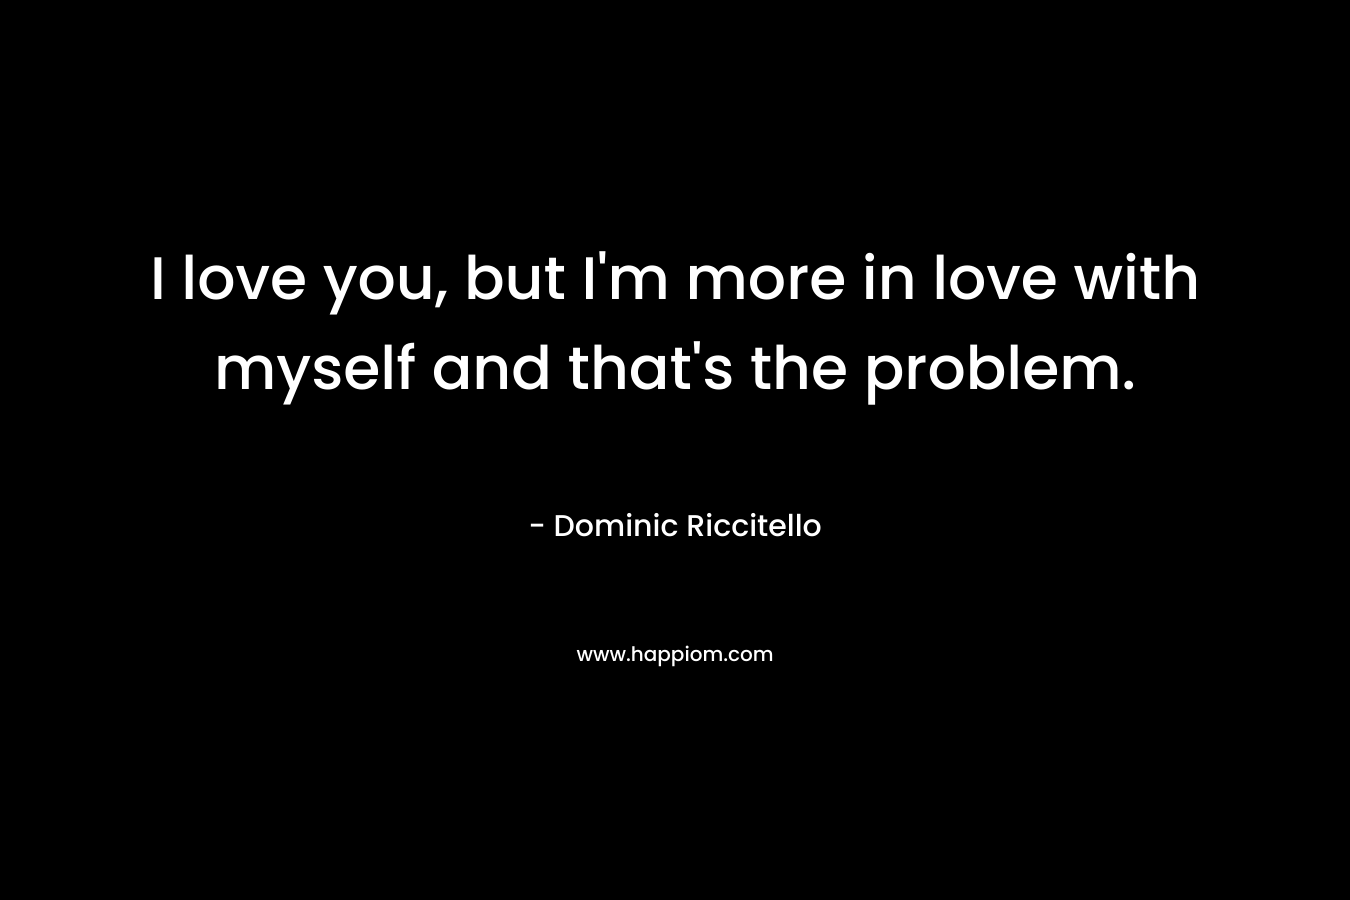 I love you, but I’m more in love with myself and that’s the problem. – Dominic Riccitello